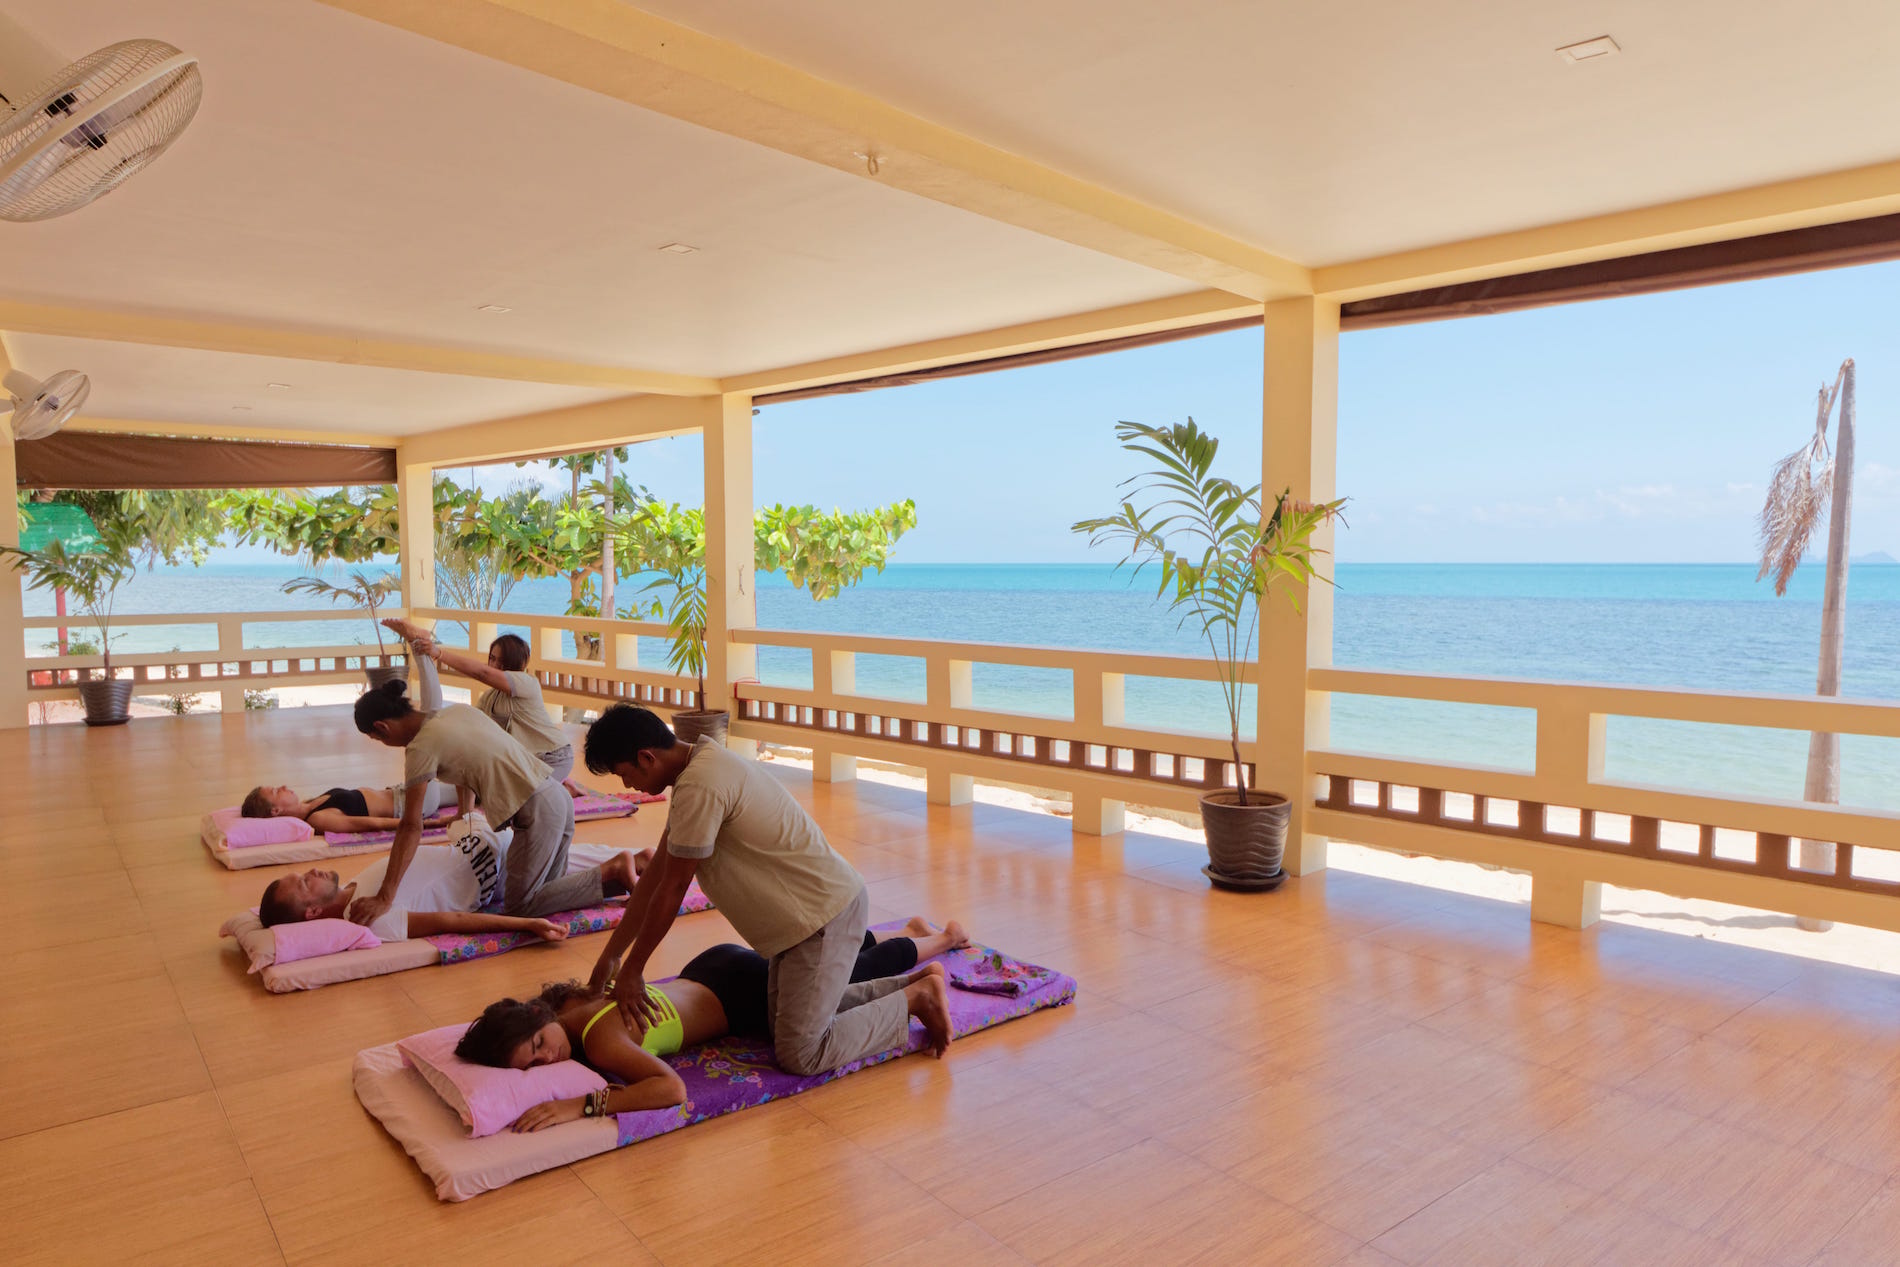 detox massage spa thailand Improvements and changes at Health Oasis Resort